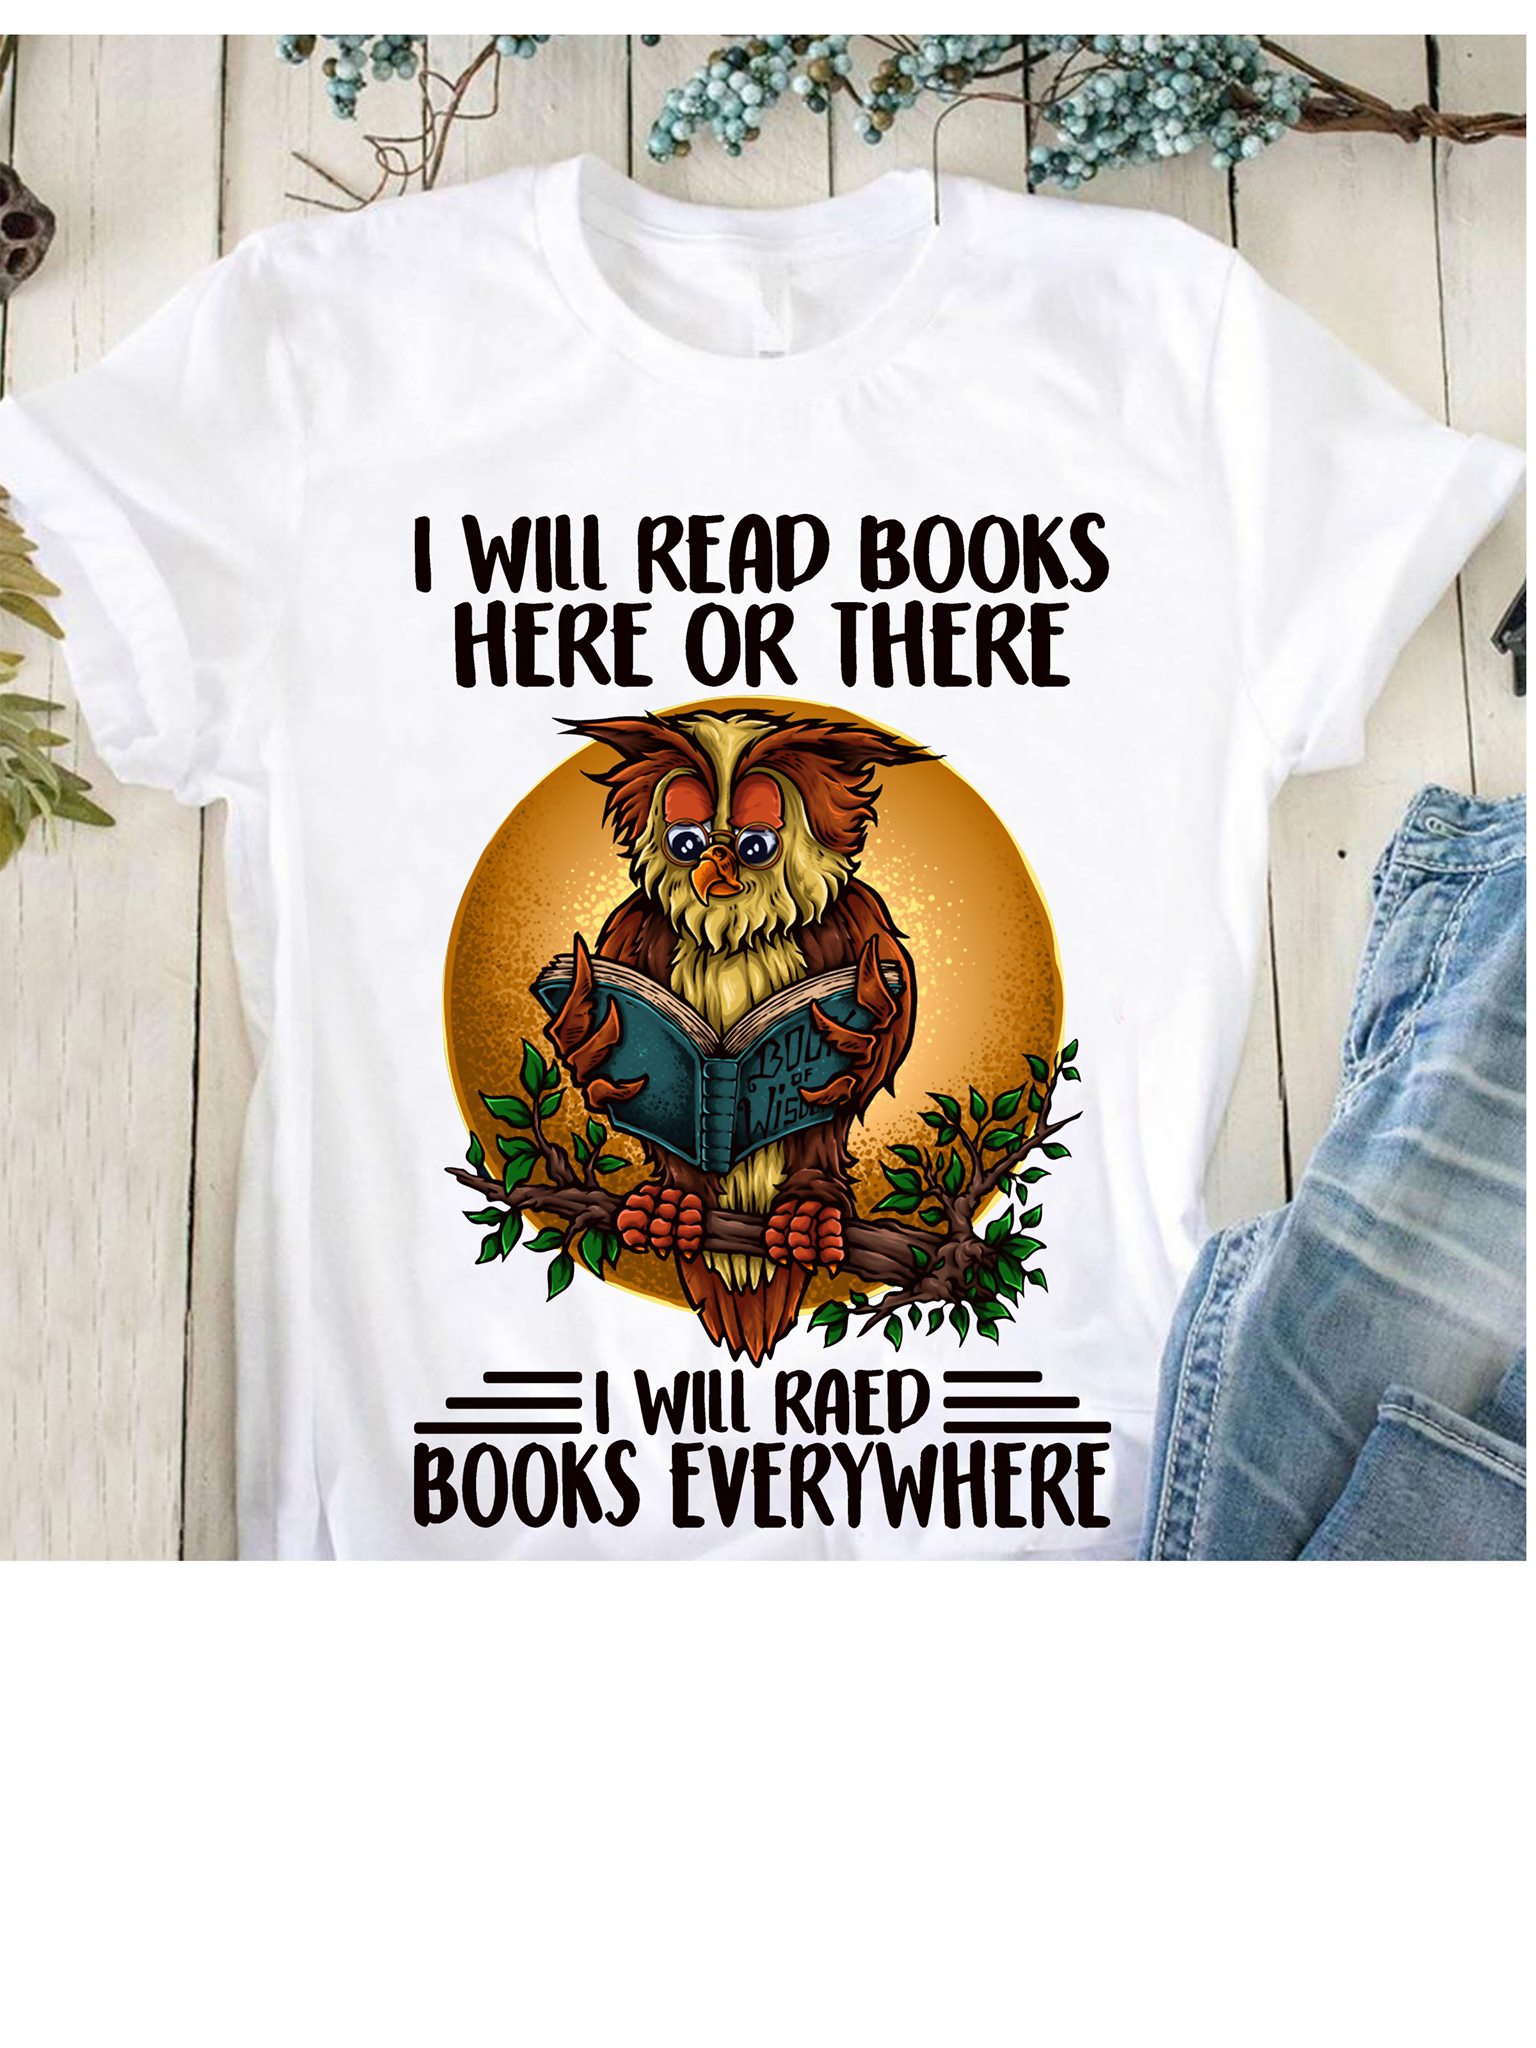 I will read books here or there I wil raed books everywhere - Owl reading books